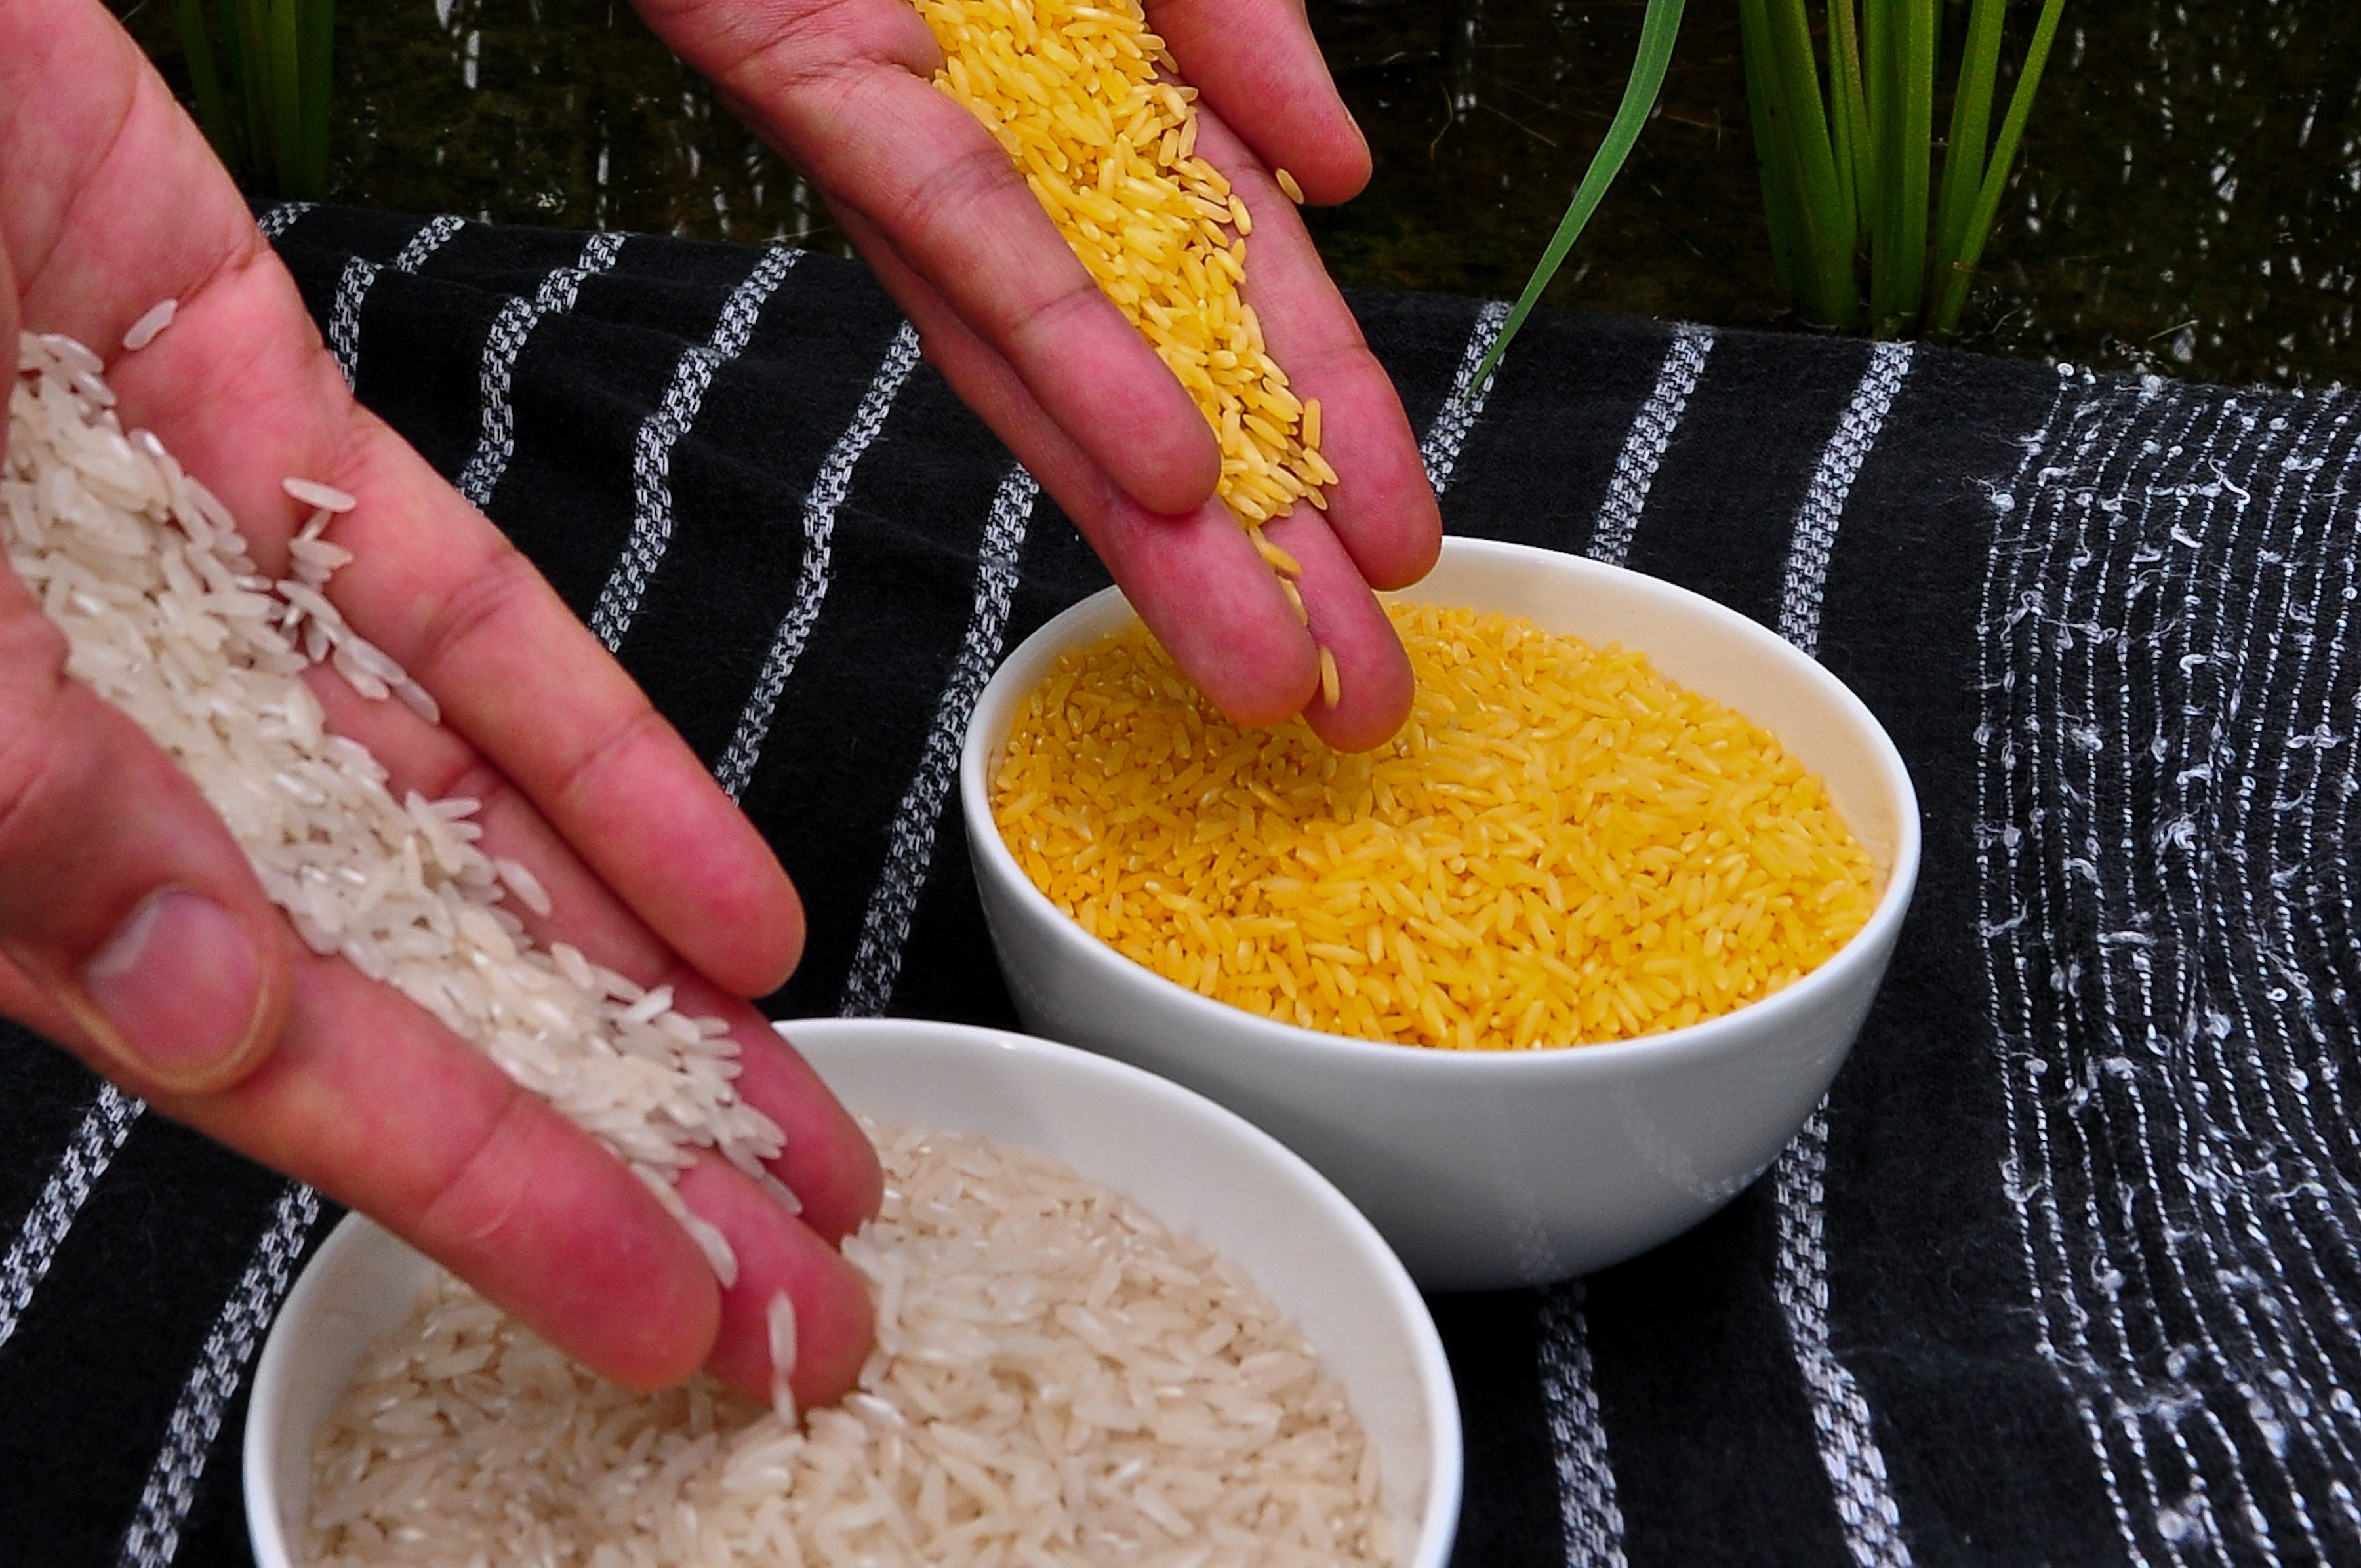 Frankenfood: Free Trade and the GMO Debate